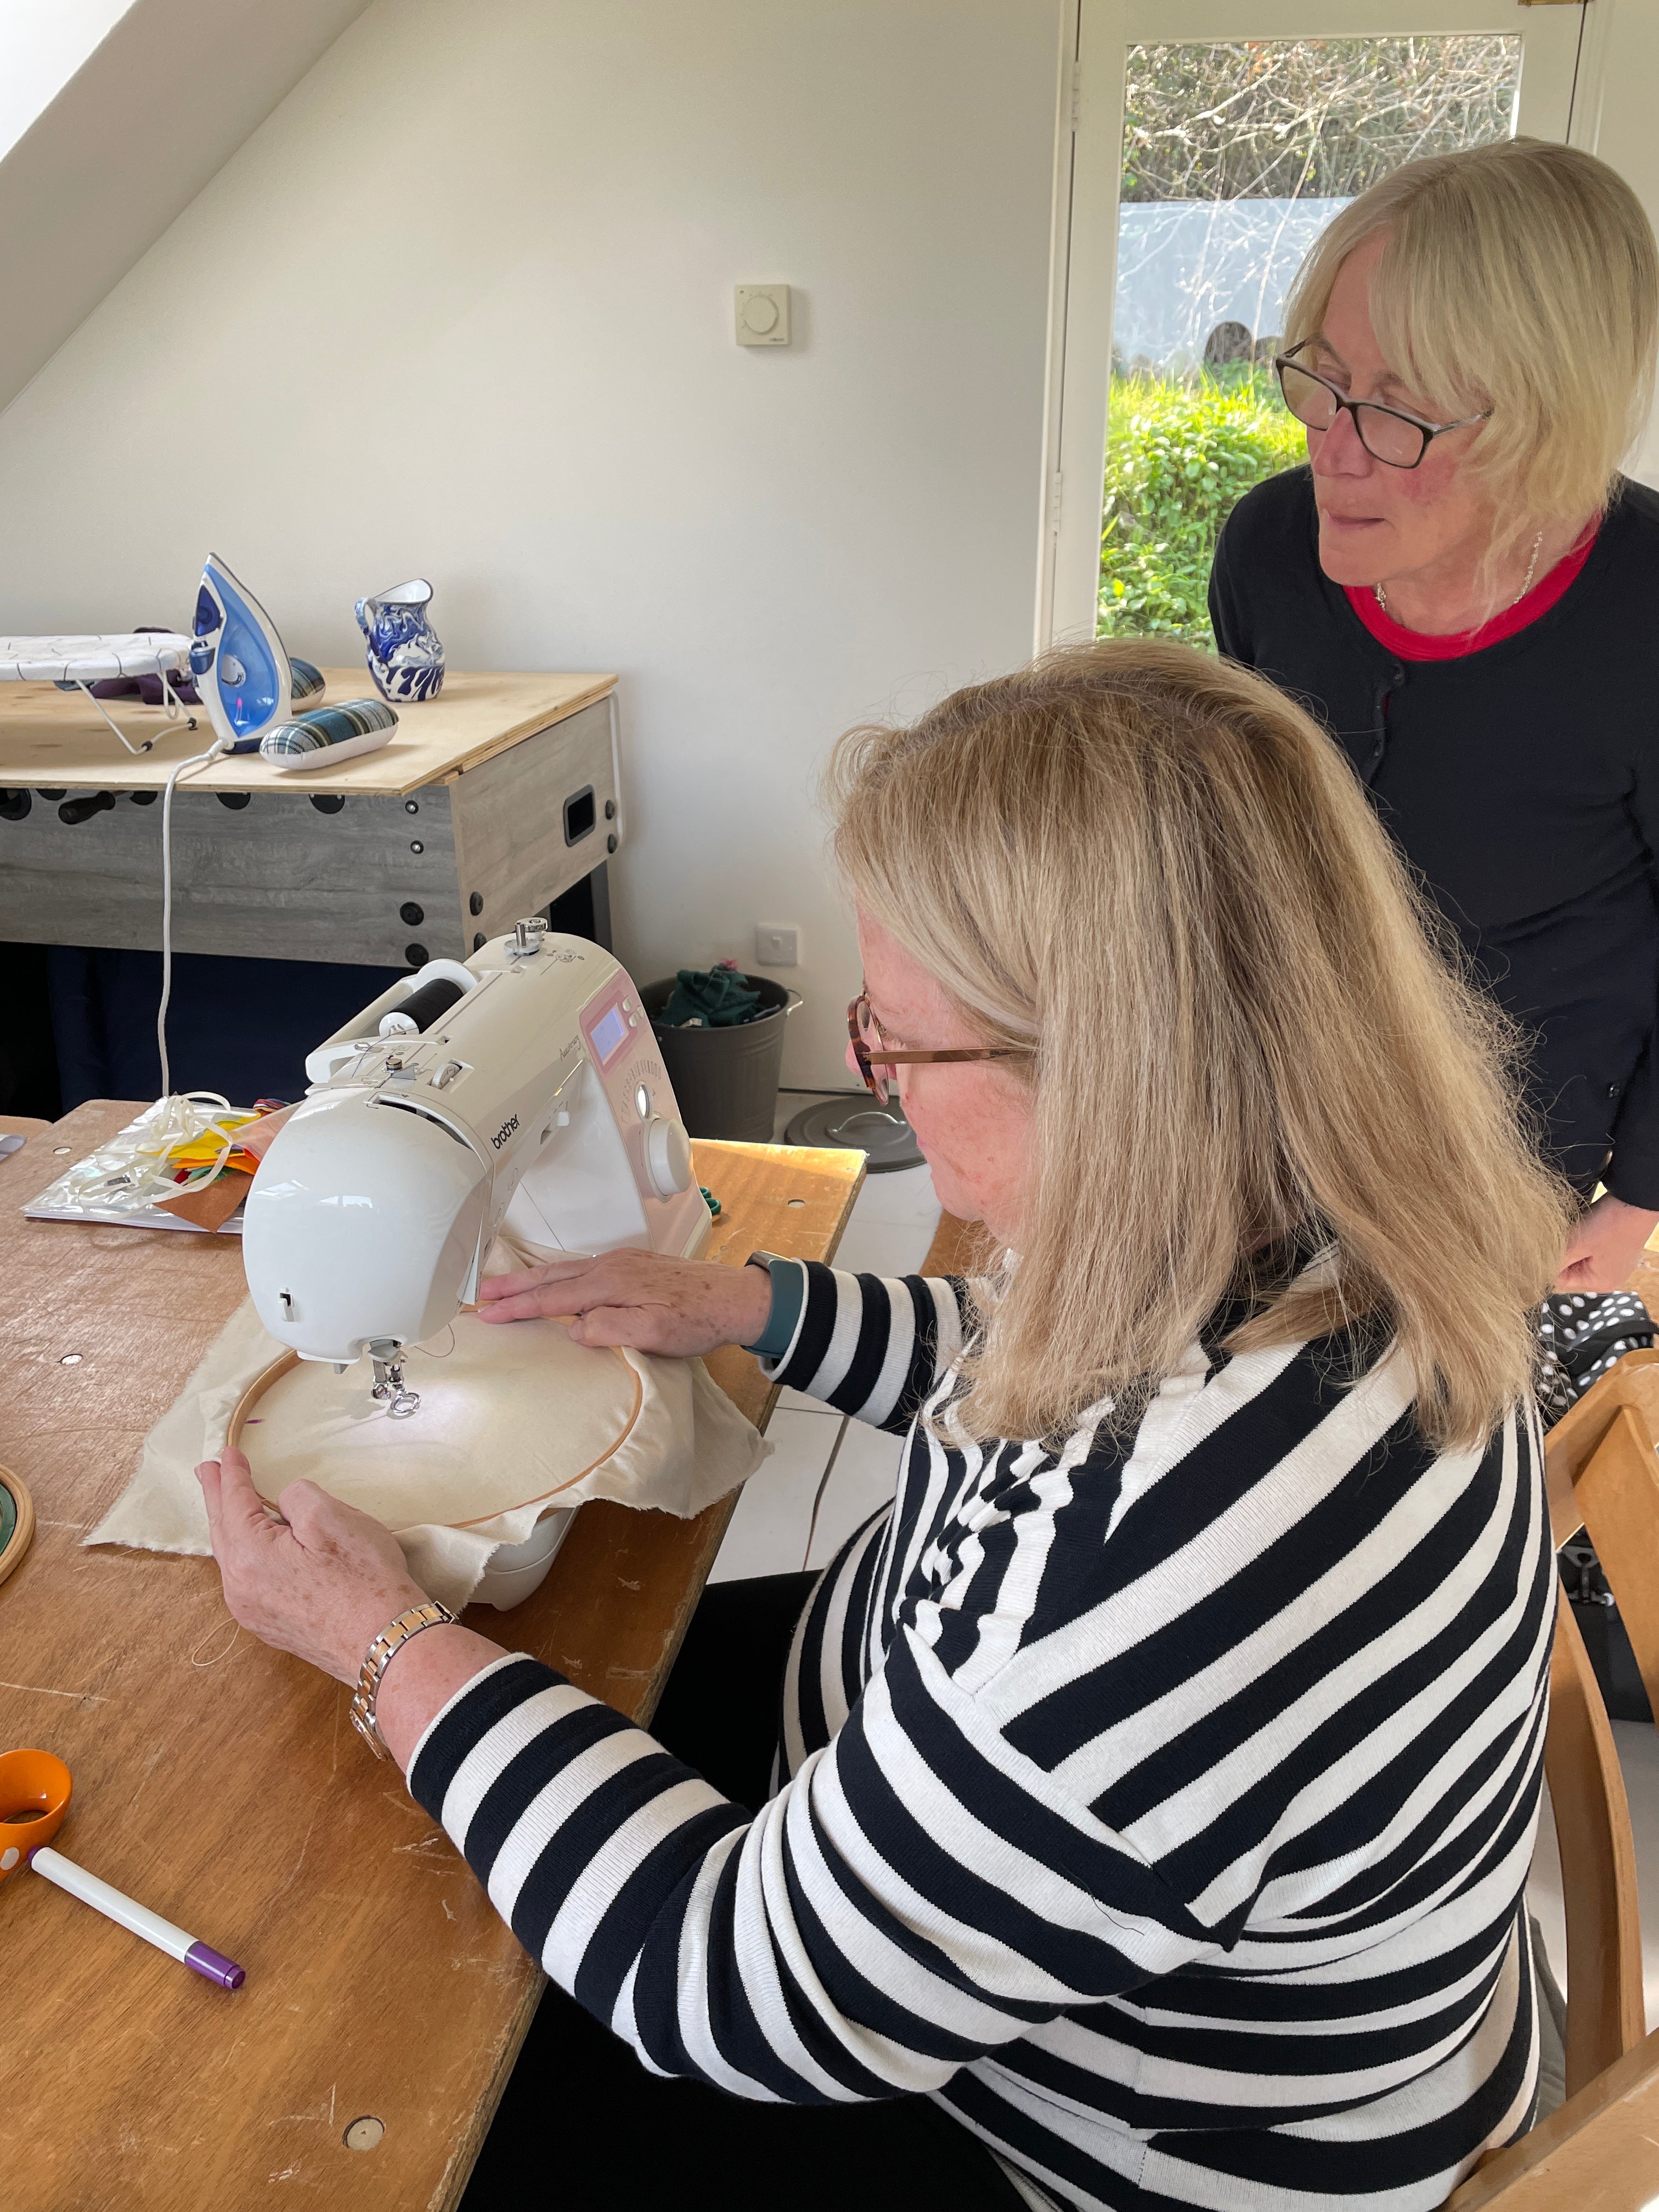 Learning a new skill at our sewing retreat in Devon